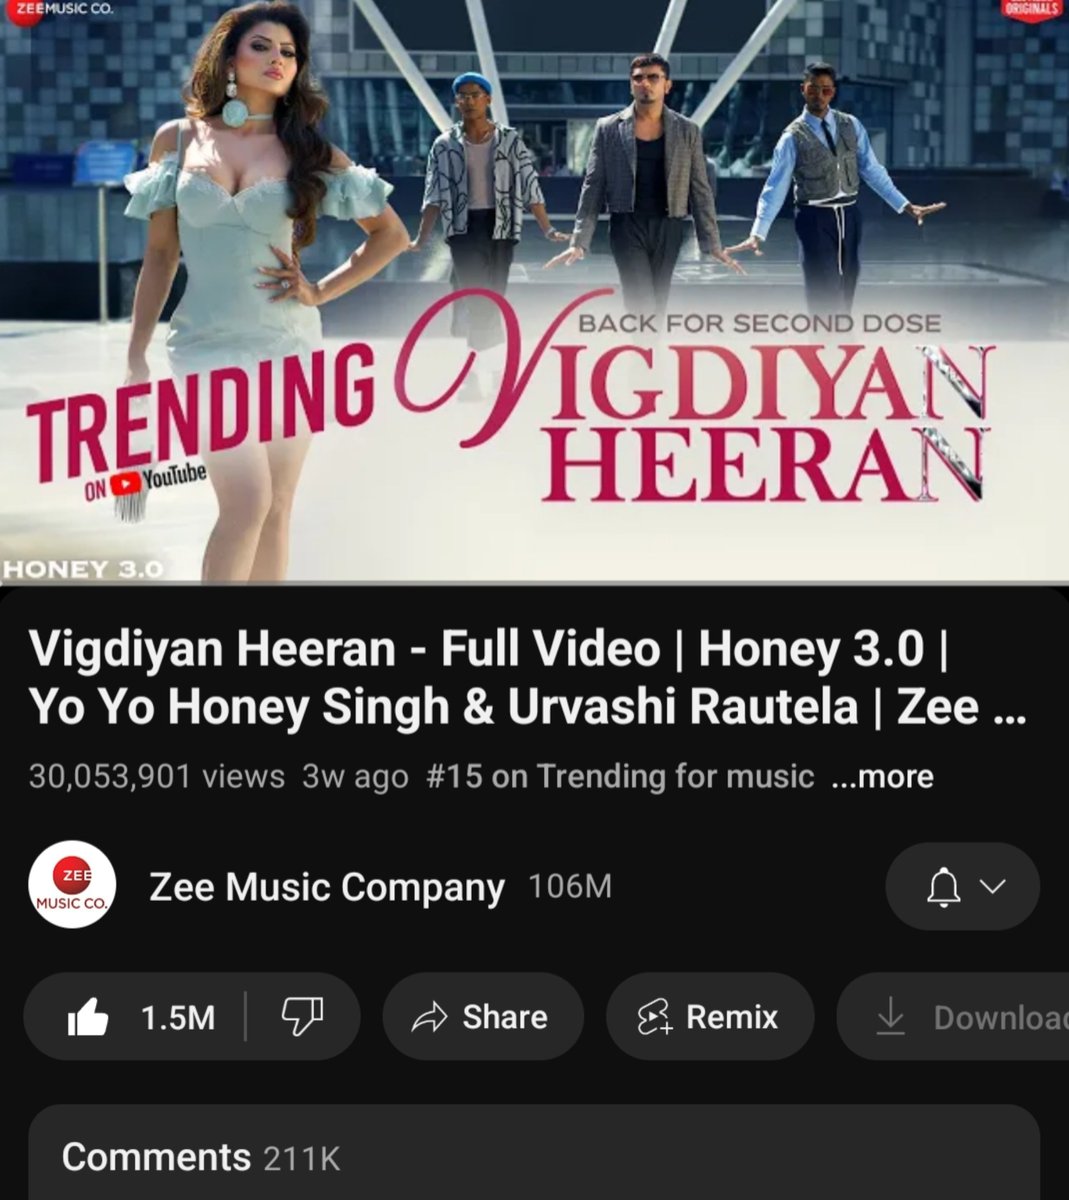 Vigdiyan Heeran Song Completes 30 Million Views 🚀 With 1.5 Million+ Likes & 200K+ Comments 🥶